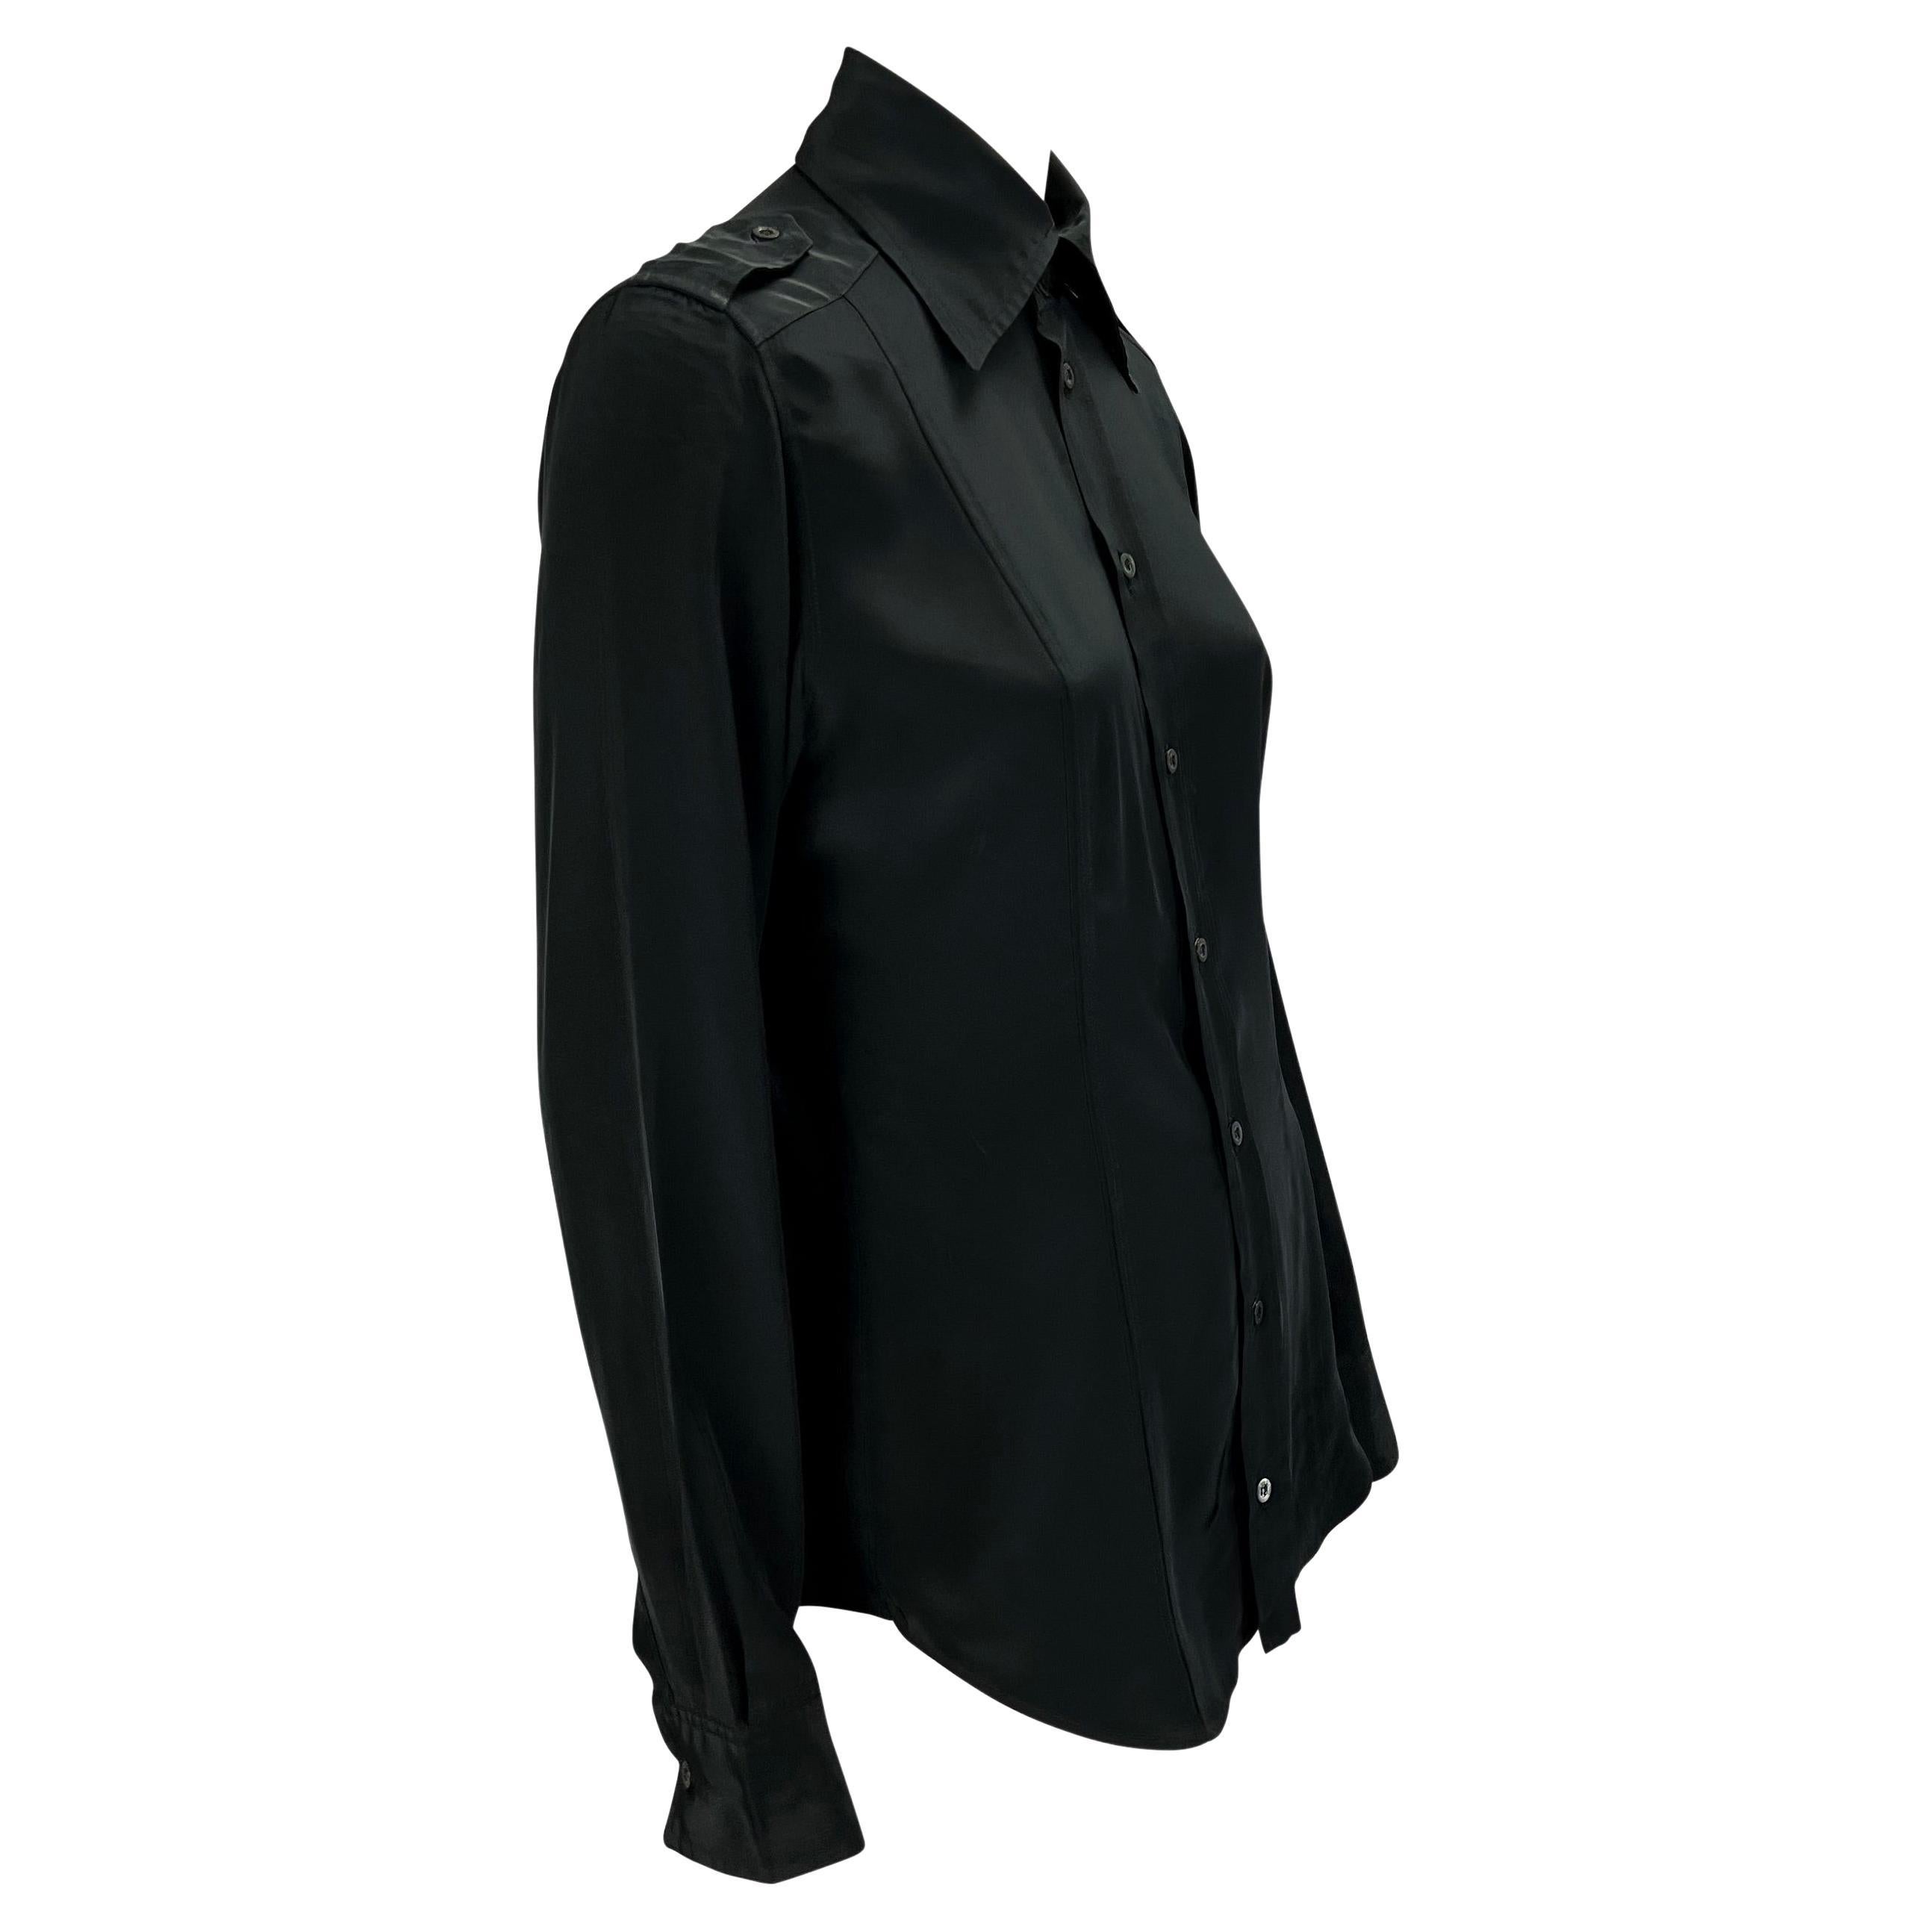 S/S 1996 Gucci by Tom Ford Black Panel Epaulettes Button Up Top For Sale 2